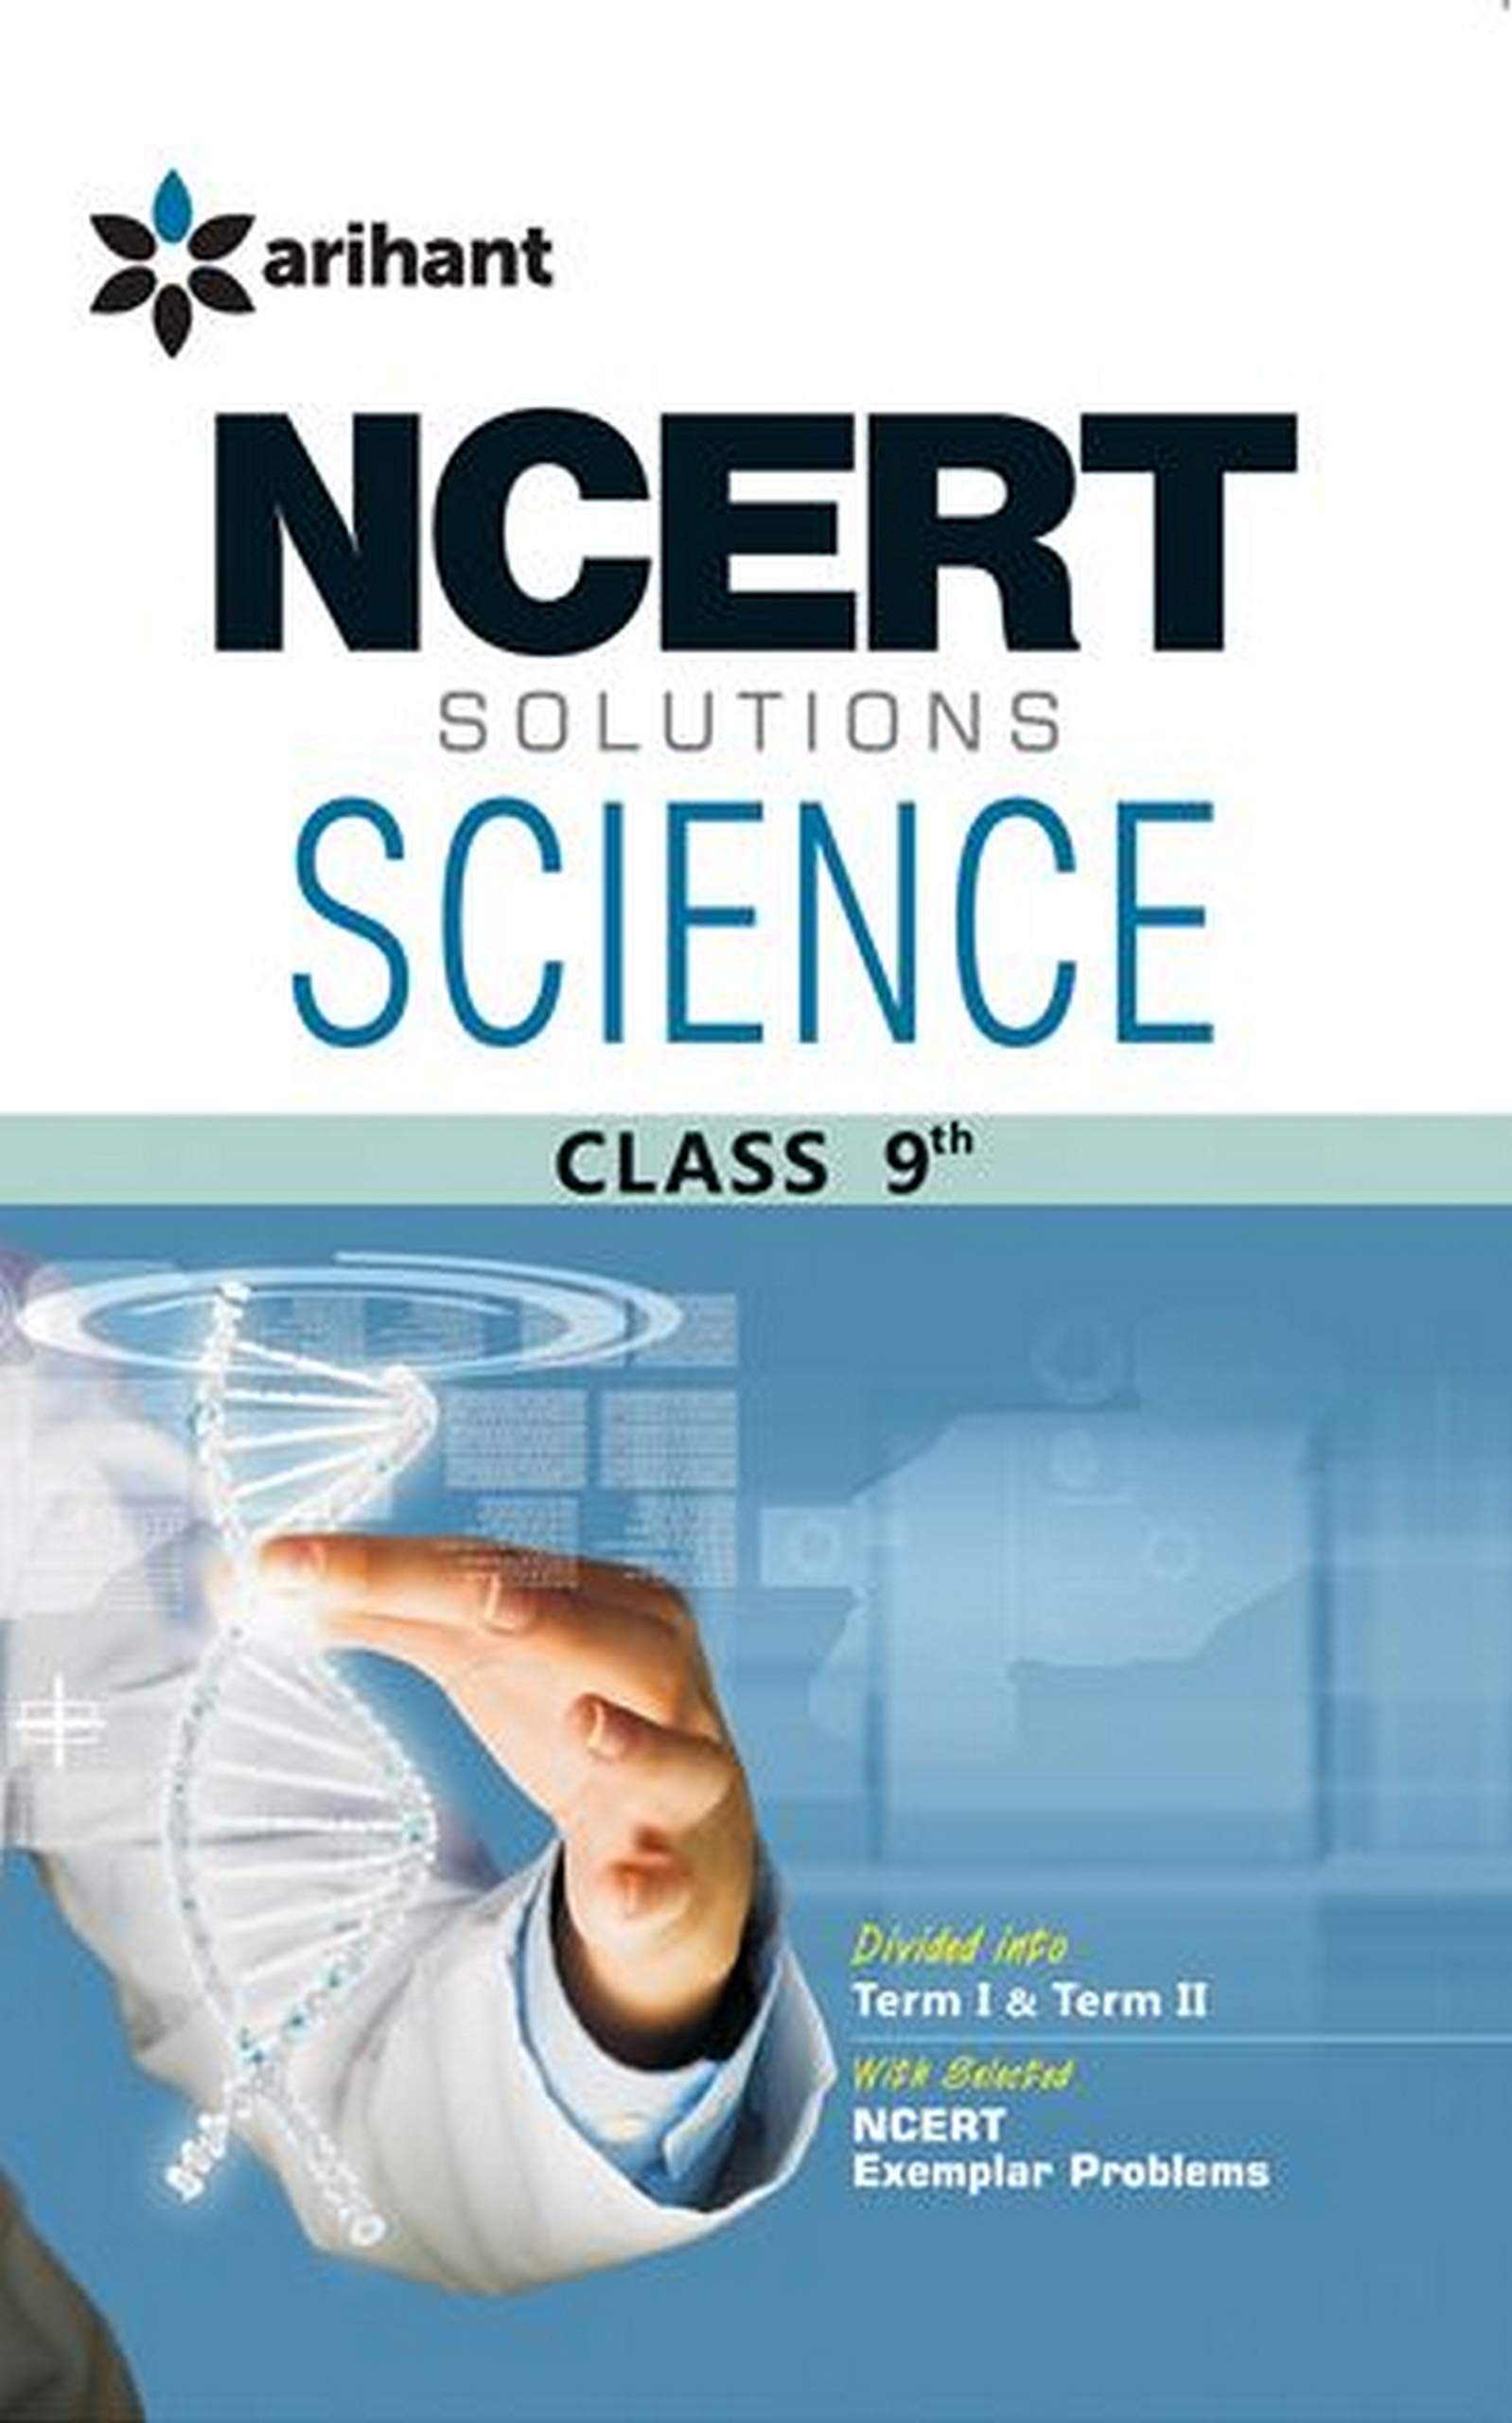 NCERT Solutions - Science for Class IX